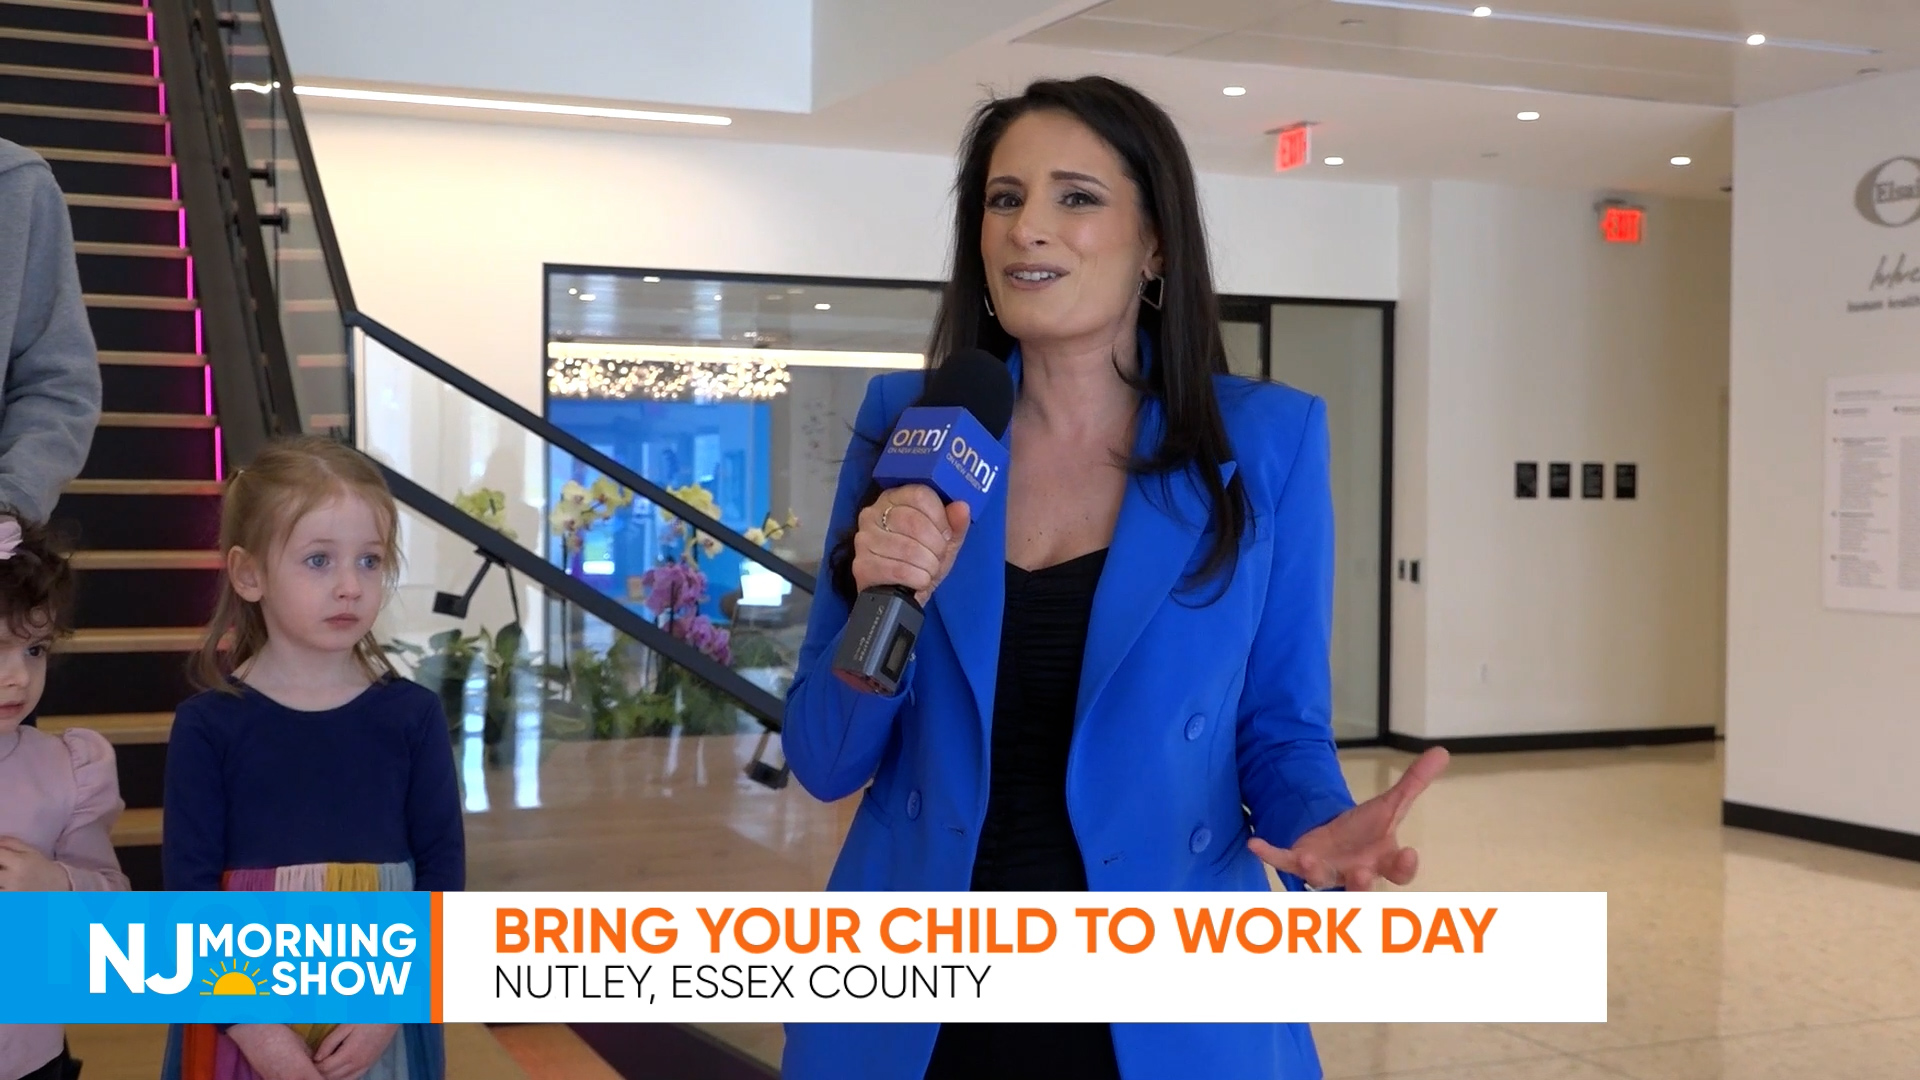 NJ Morning Show – Bring Your Child to Work